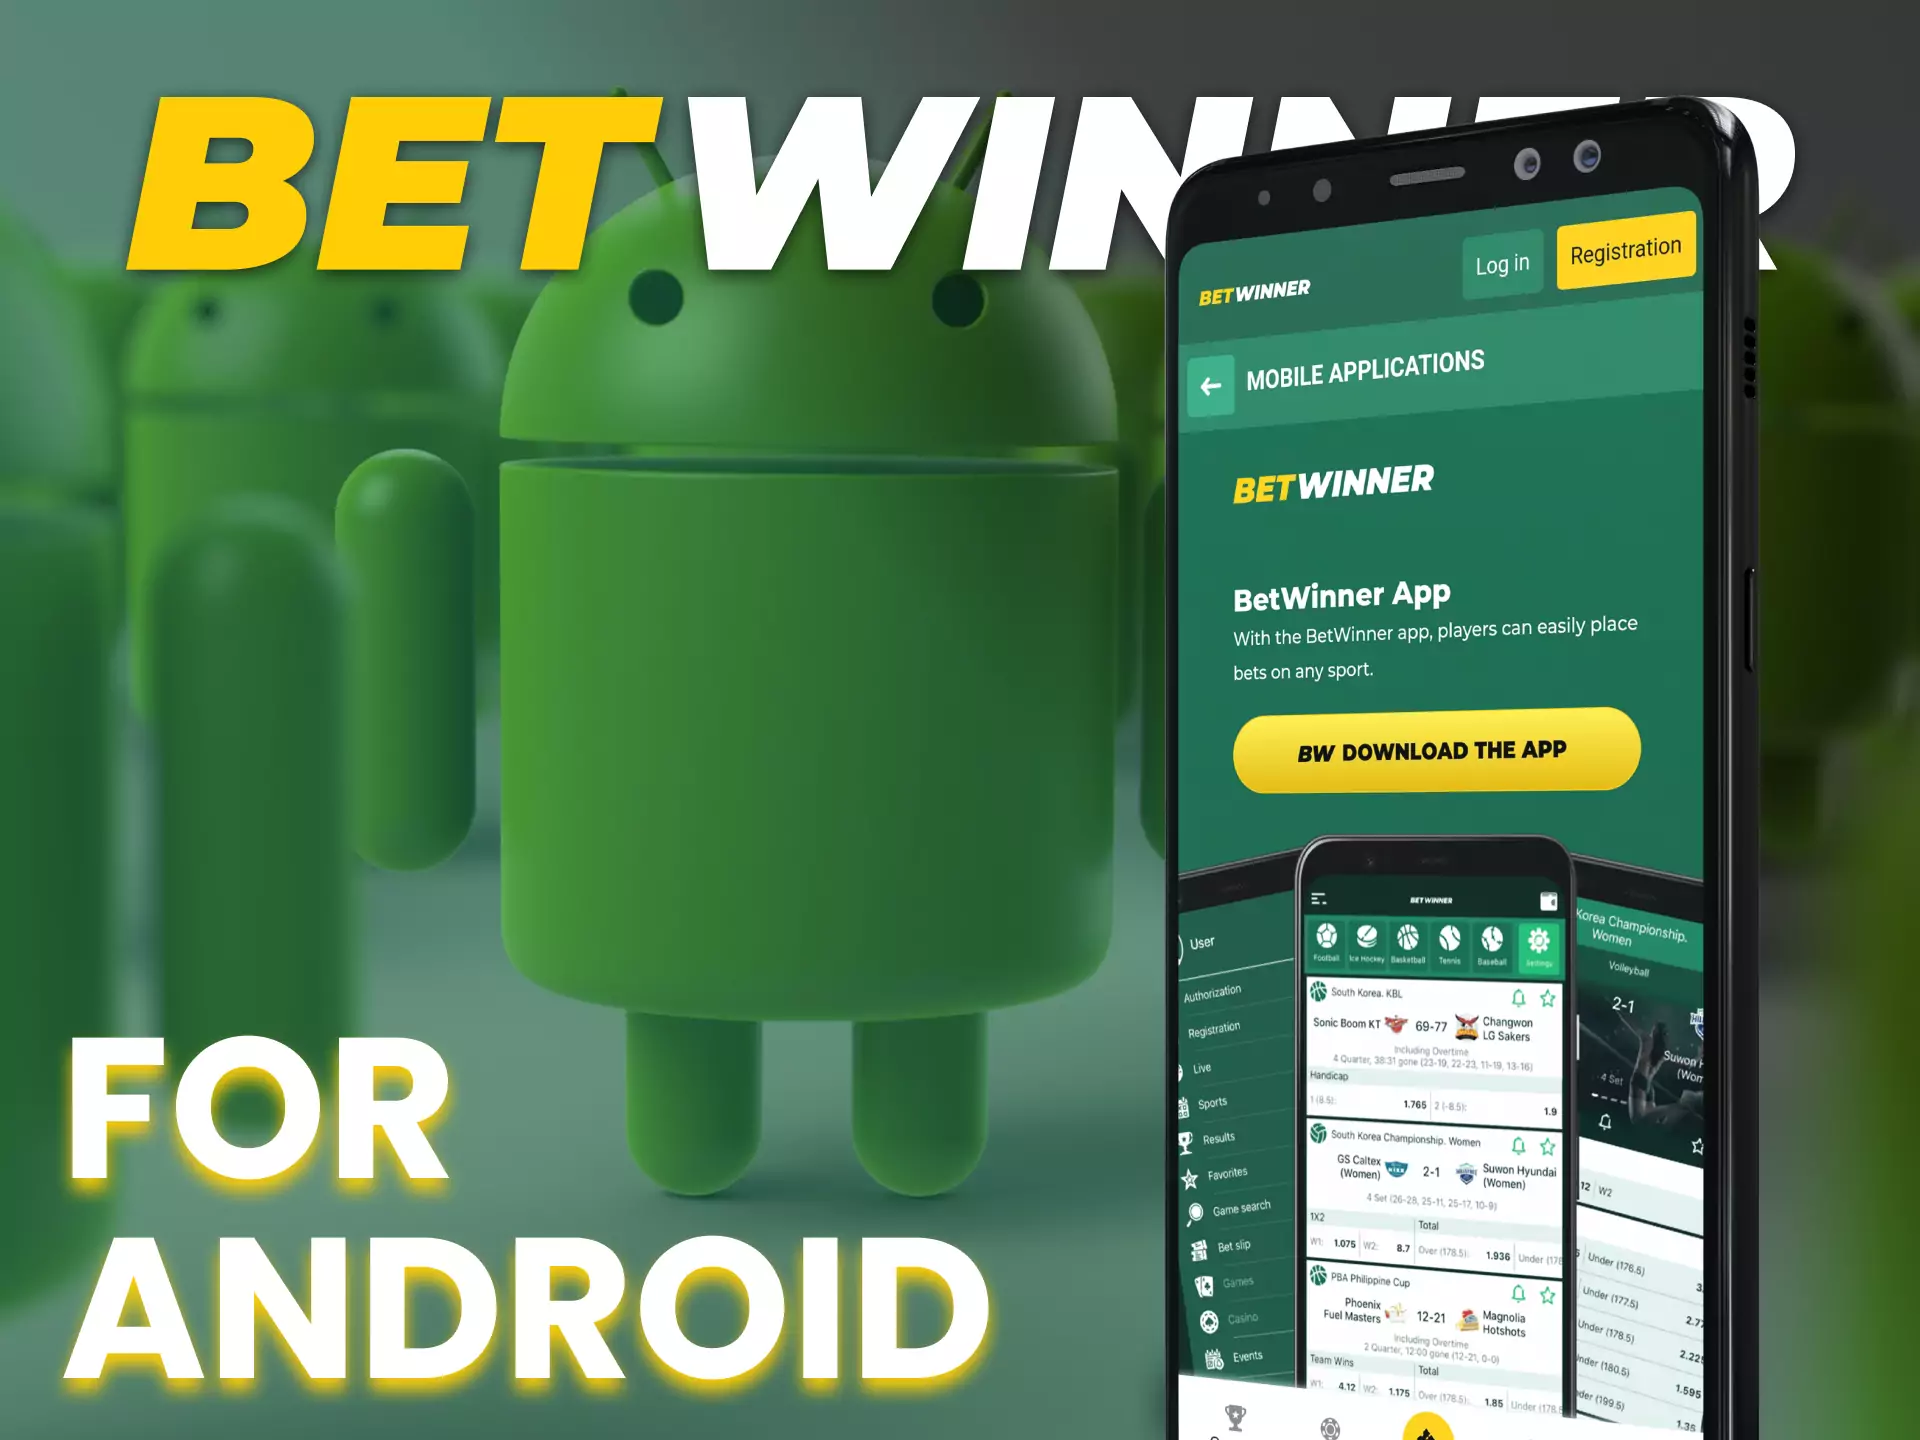 The Betwinner app can be installed on your Android device.